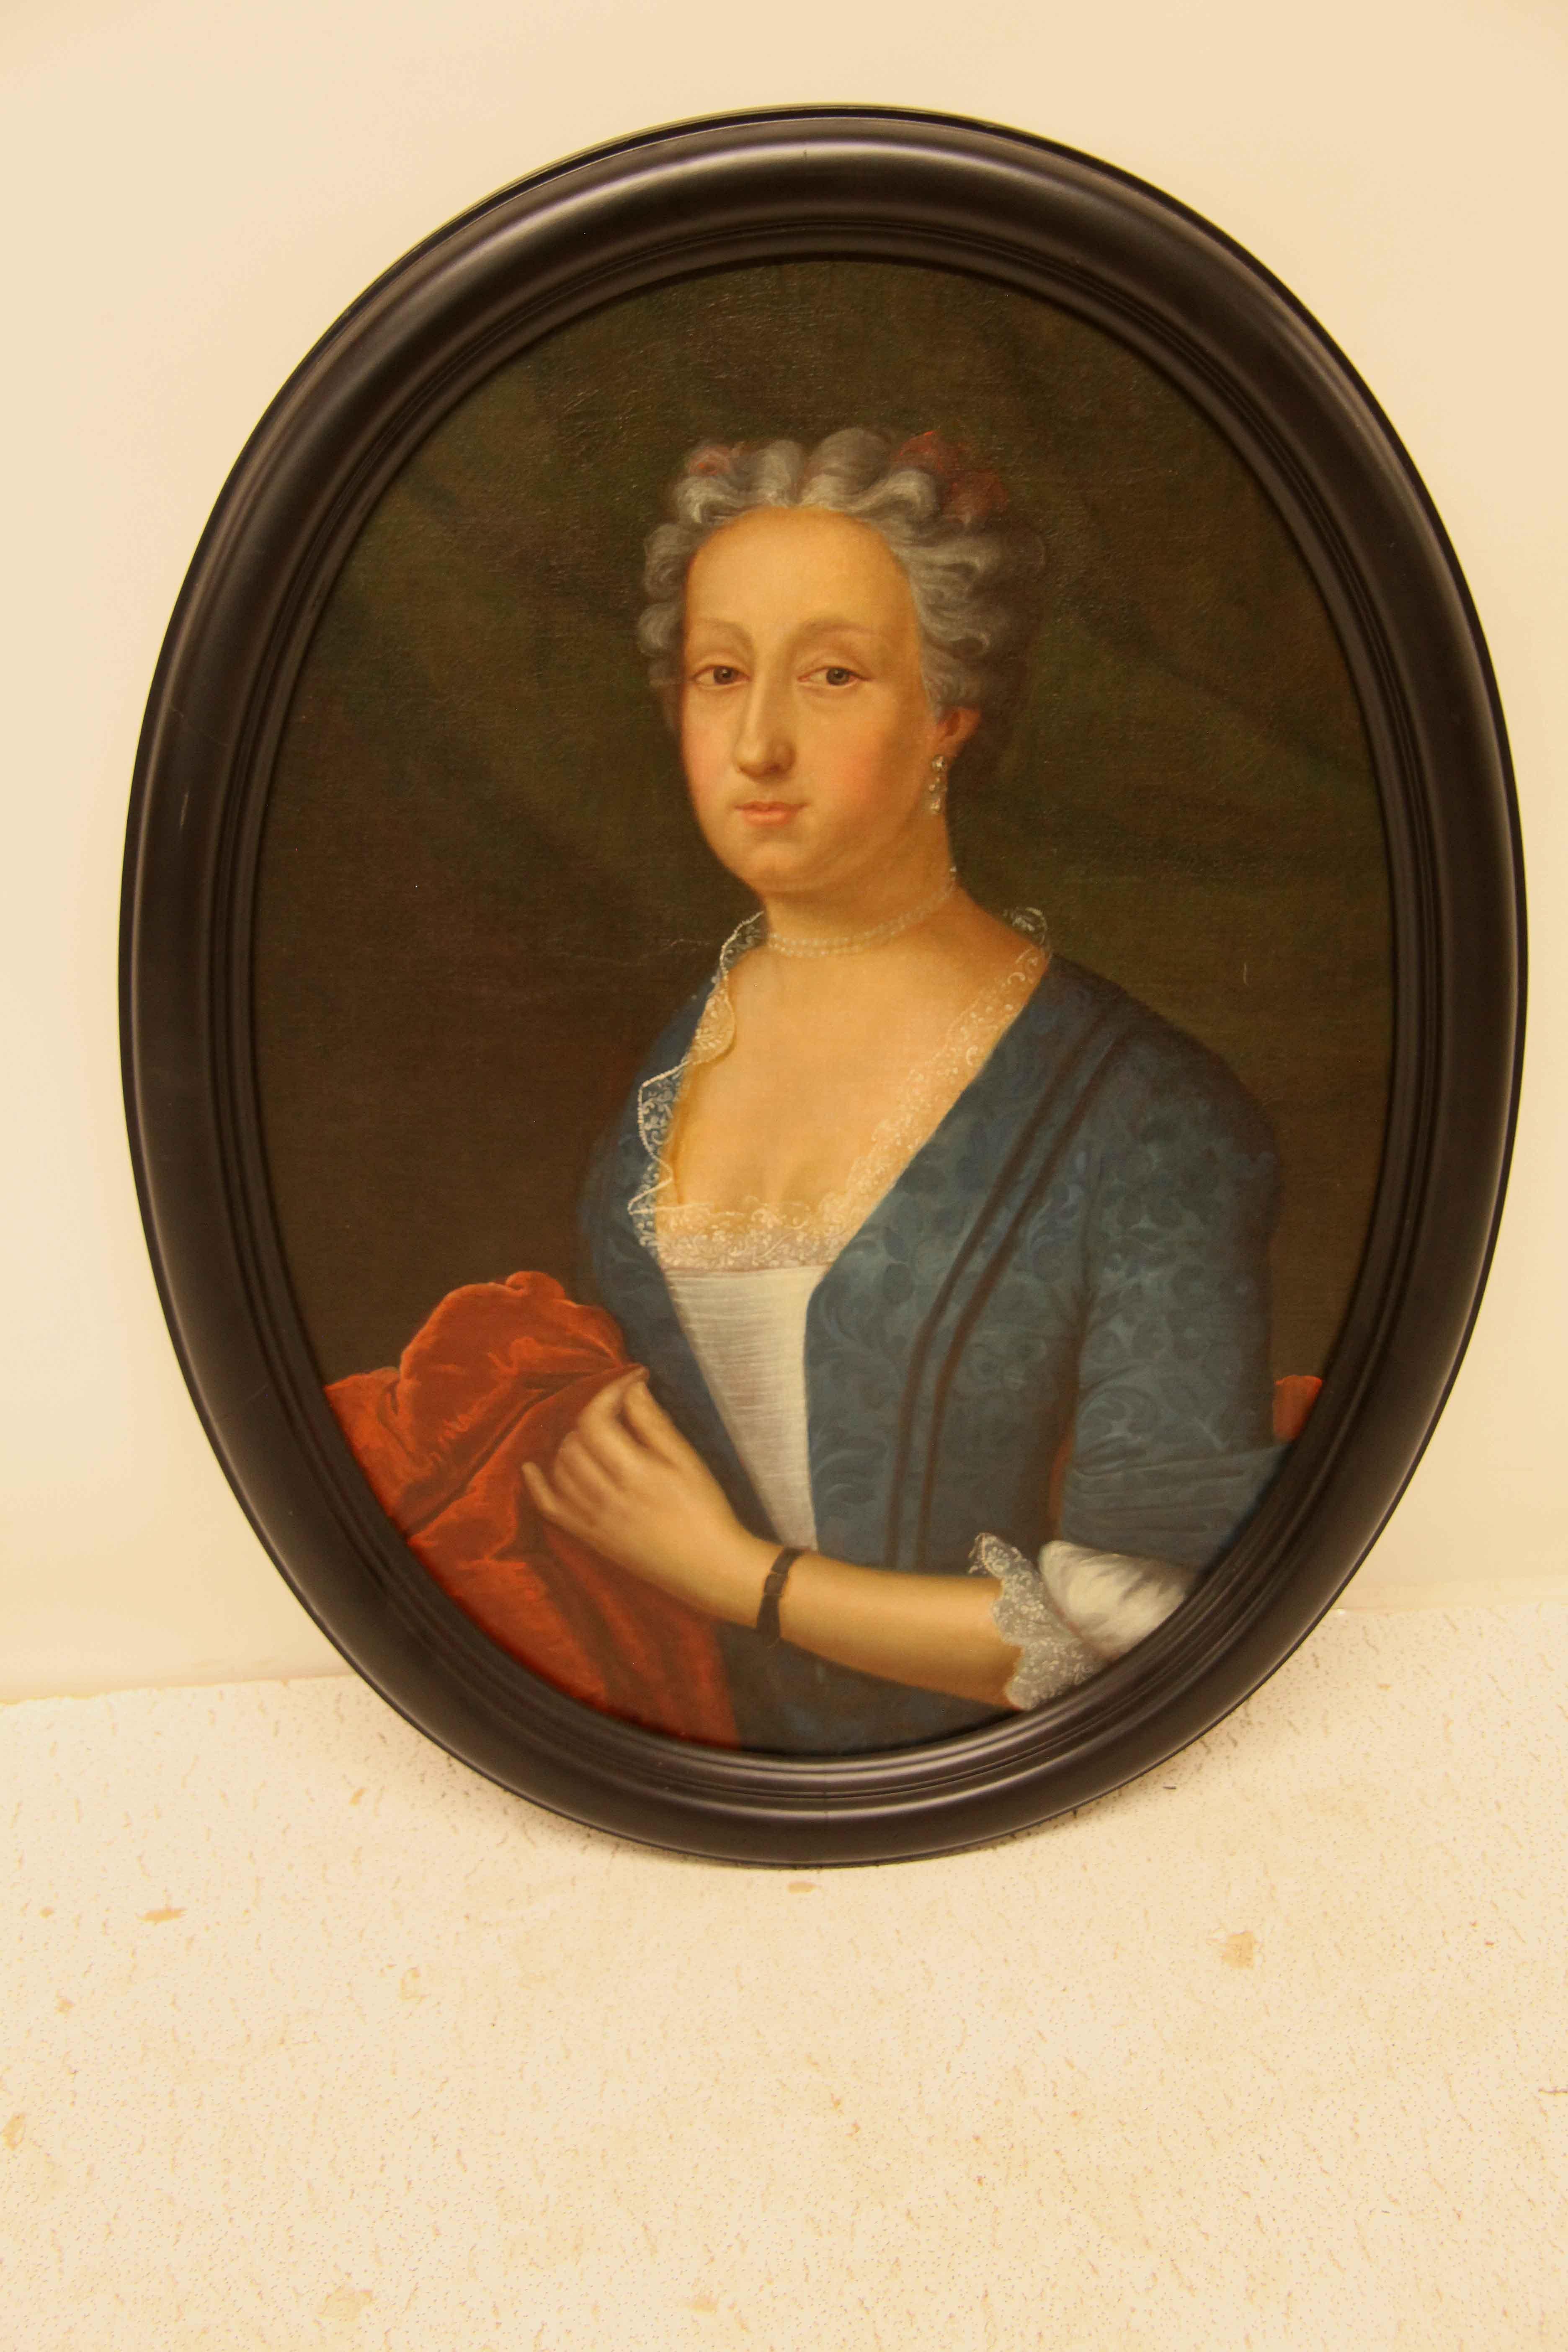 This description is taken from the information secured to the reverse of the painting - 18th century oval oil portrait of Rebecca Steel of New Timber, Sussex, England , painted by Johann Christoffel Schultz of Amsterdam (1749-1812), signed on the